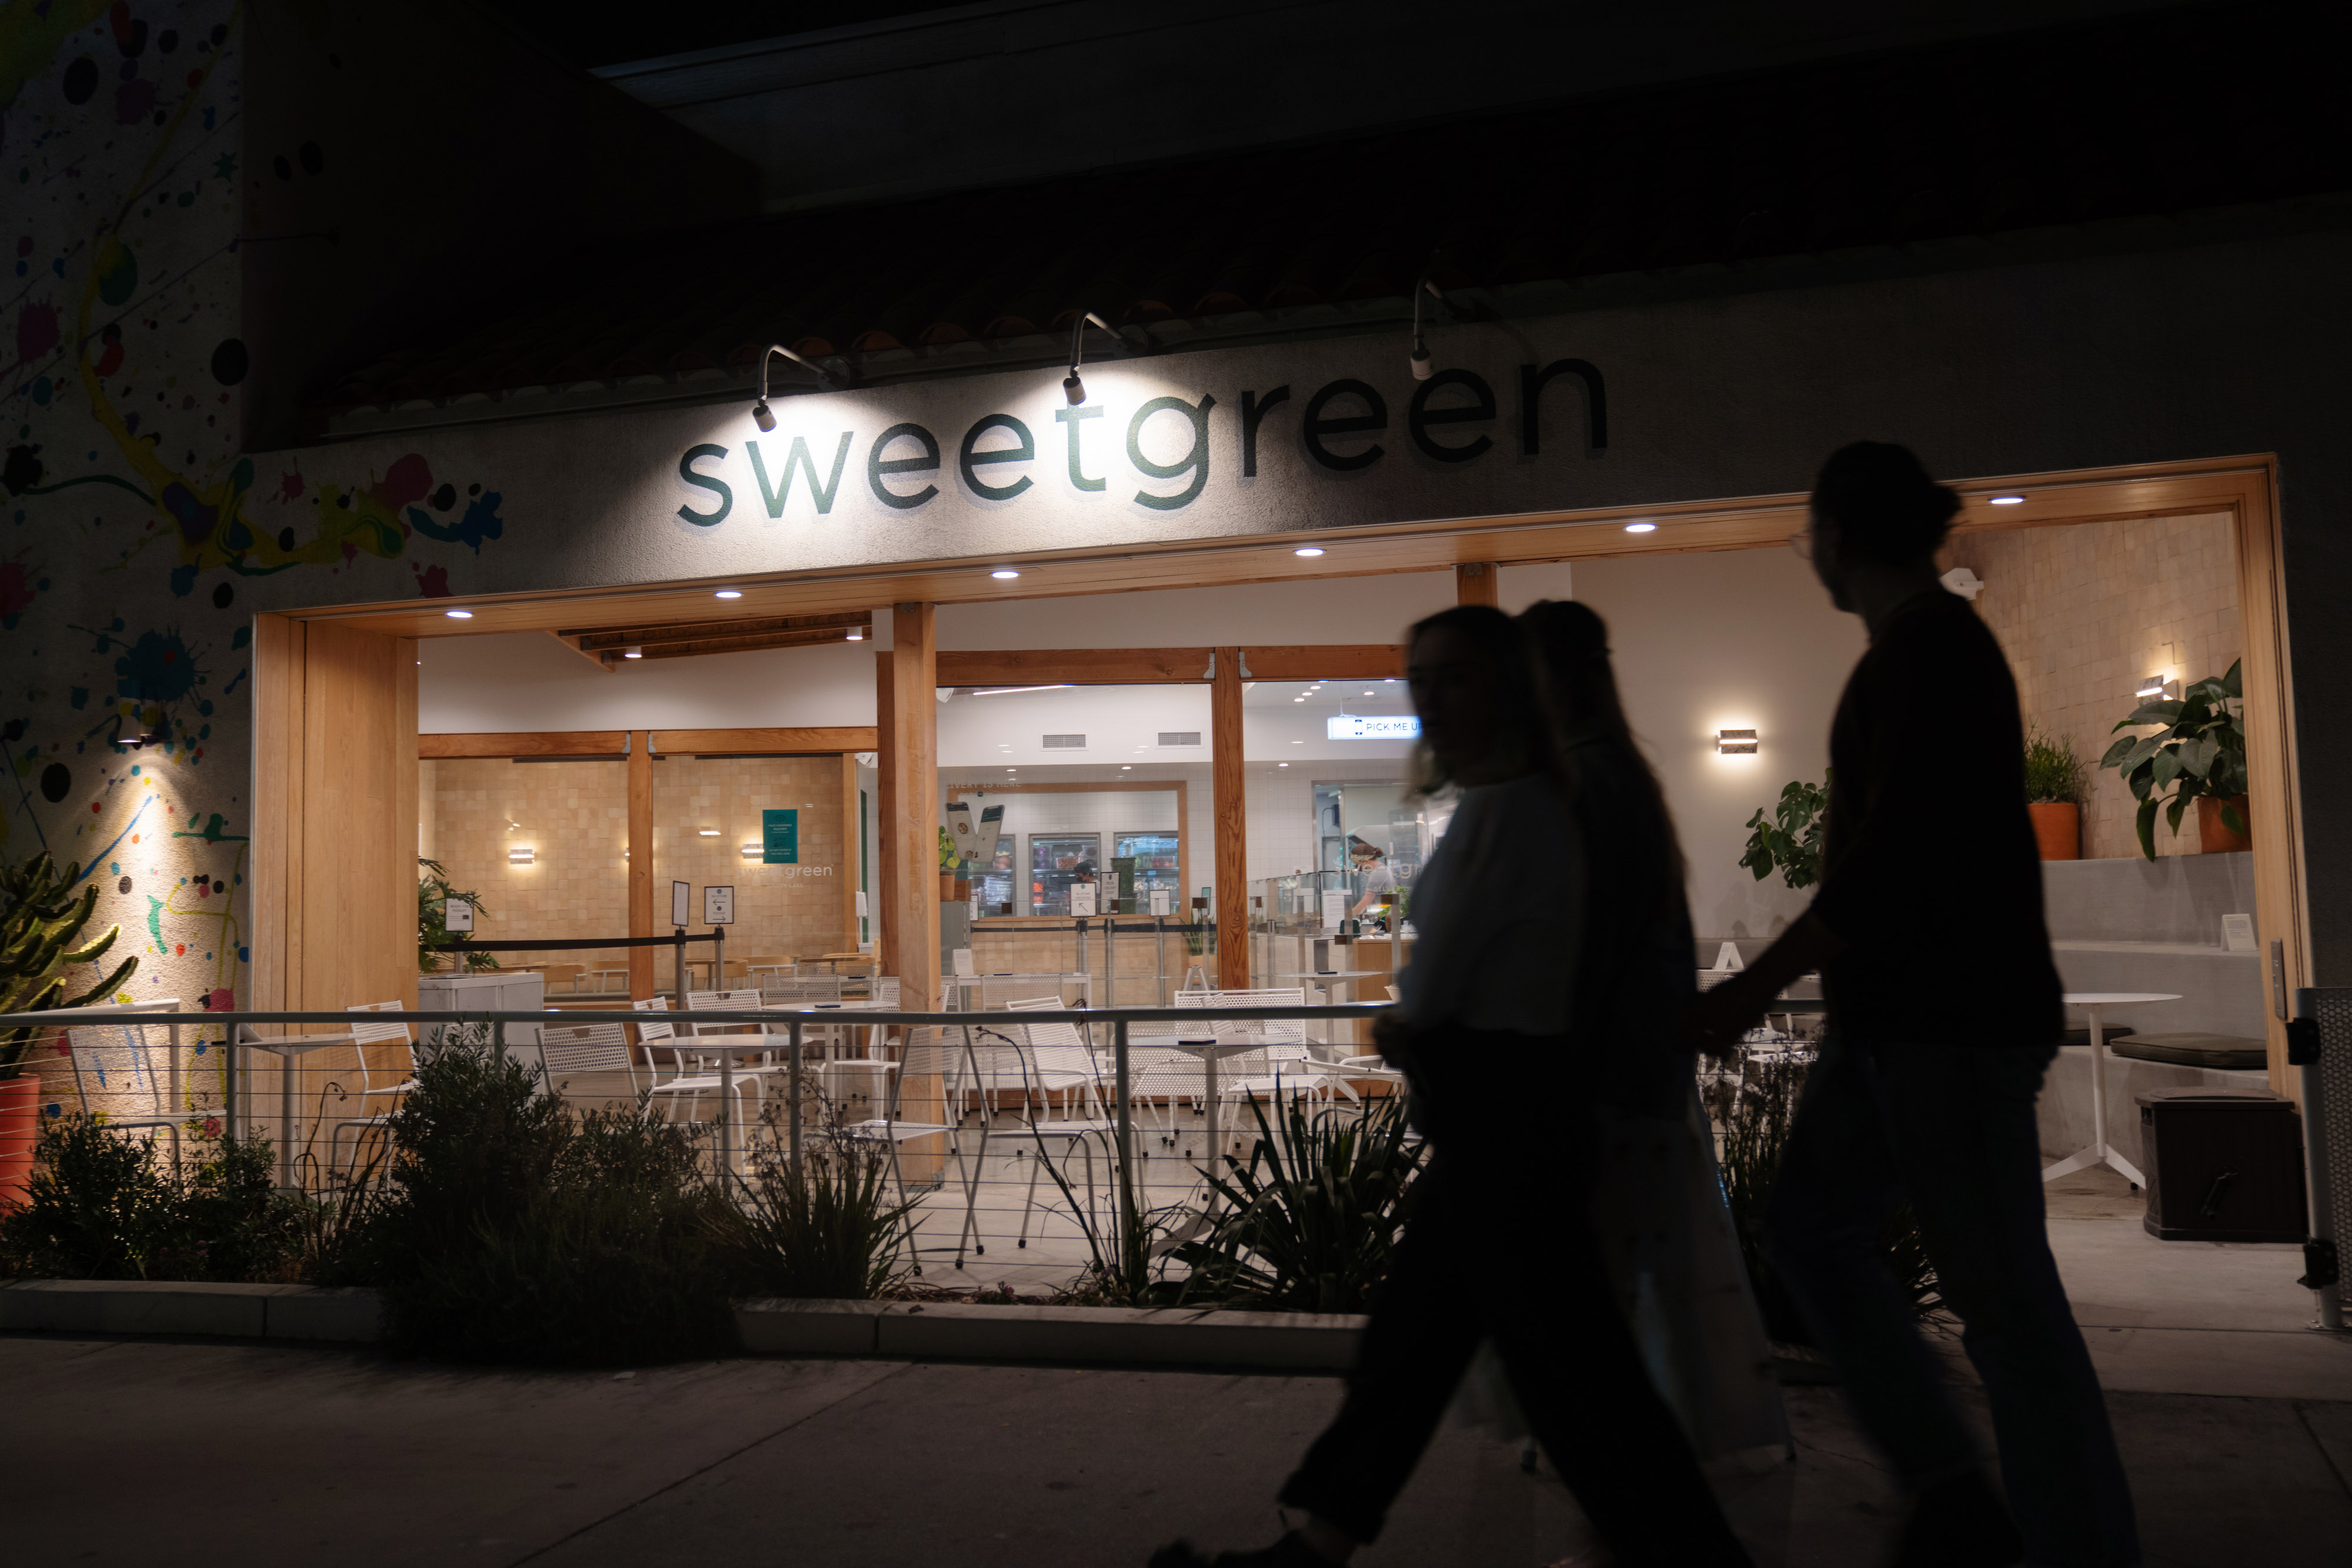 A Sweetgreen restaurant in Los Angeles.